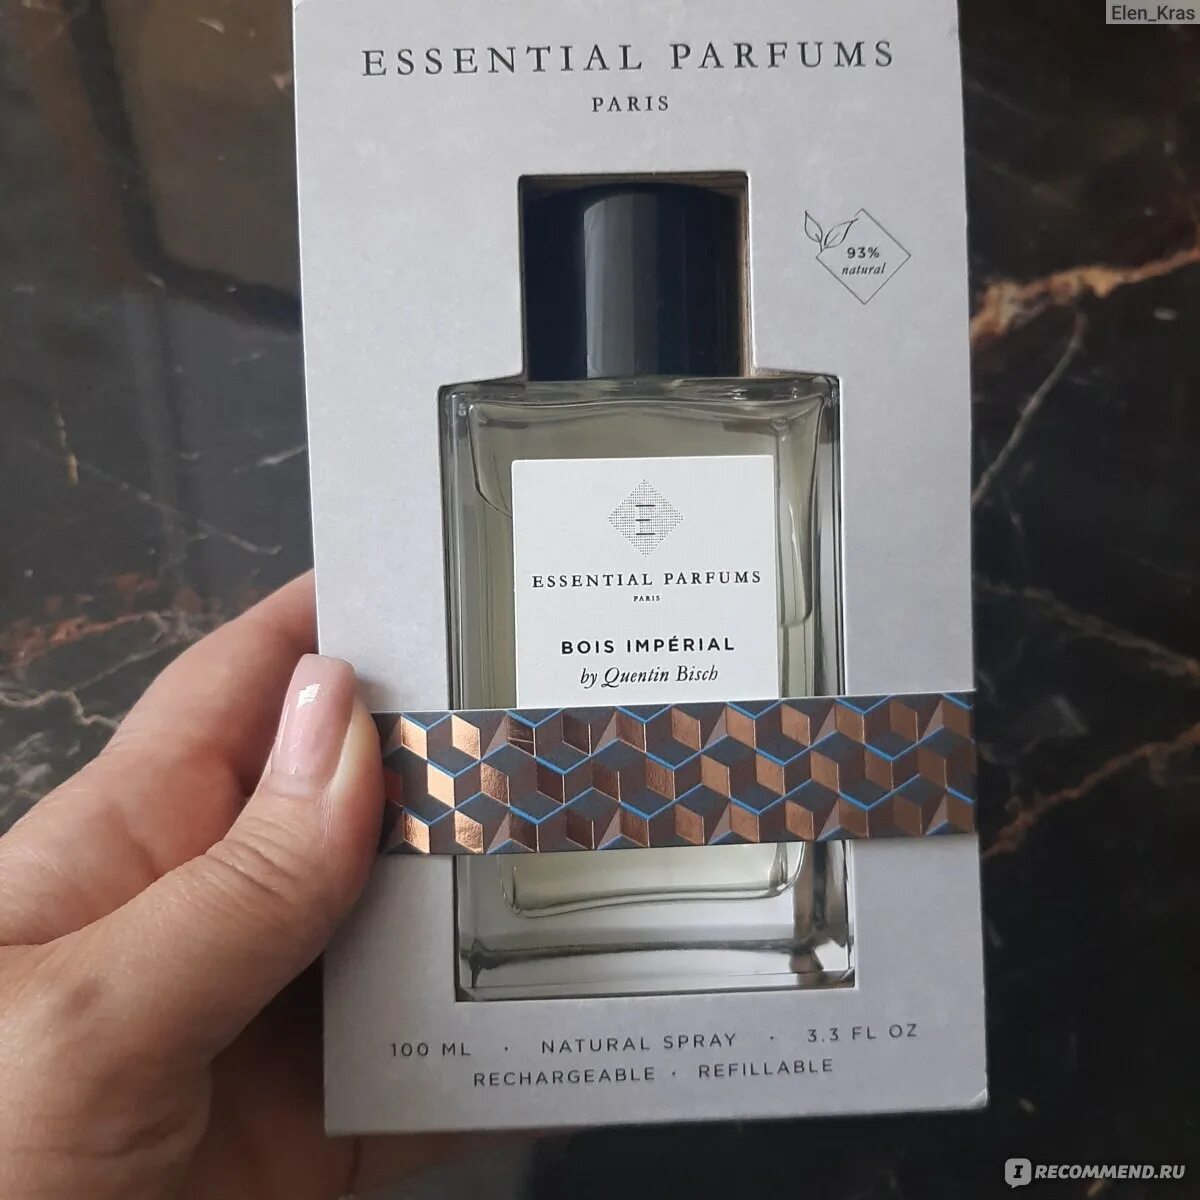 Bois imperial essential parfums limited edition